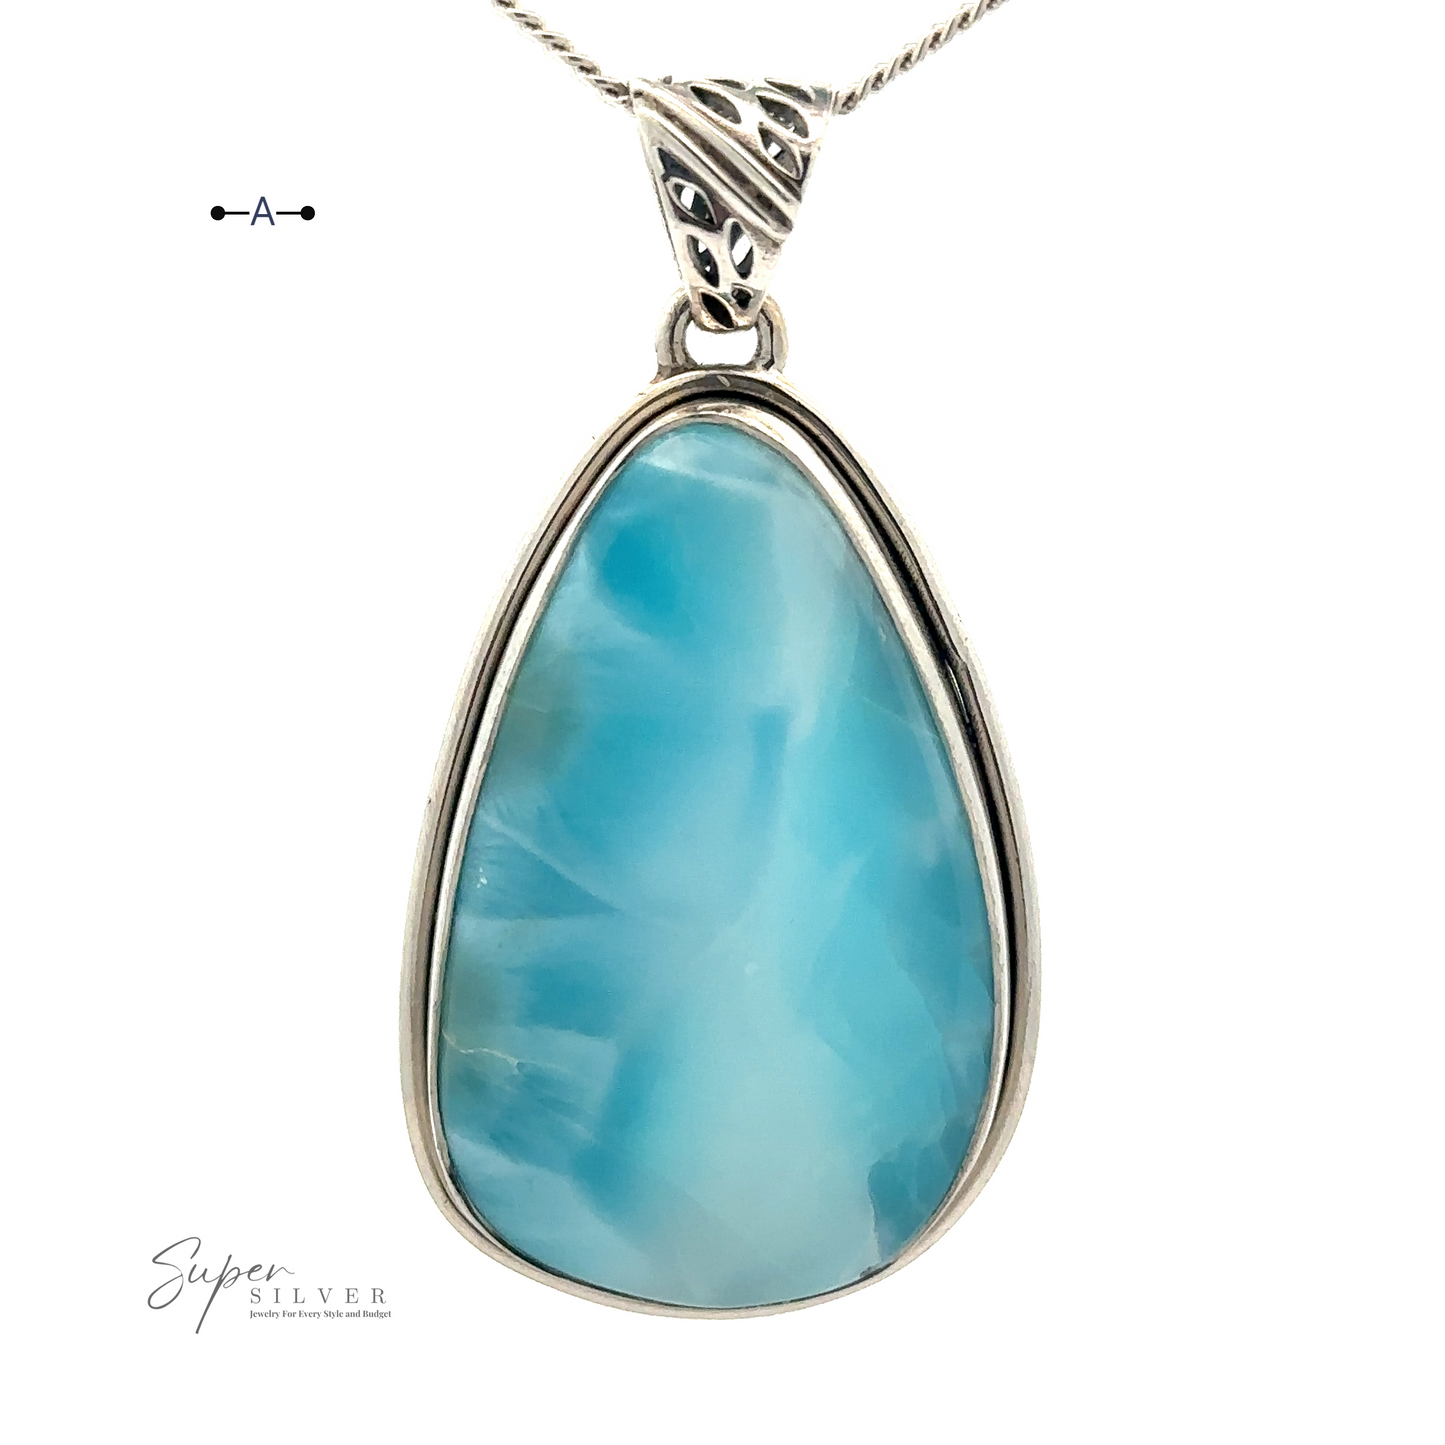 An elegant Larimar Pendant with Simple Border featuring a teardrop-shaped Larimar gemstone set in a sterling silver frame, displayed against a white background.